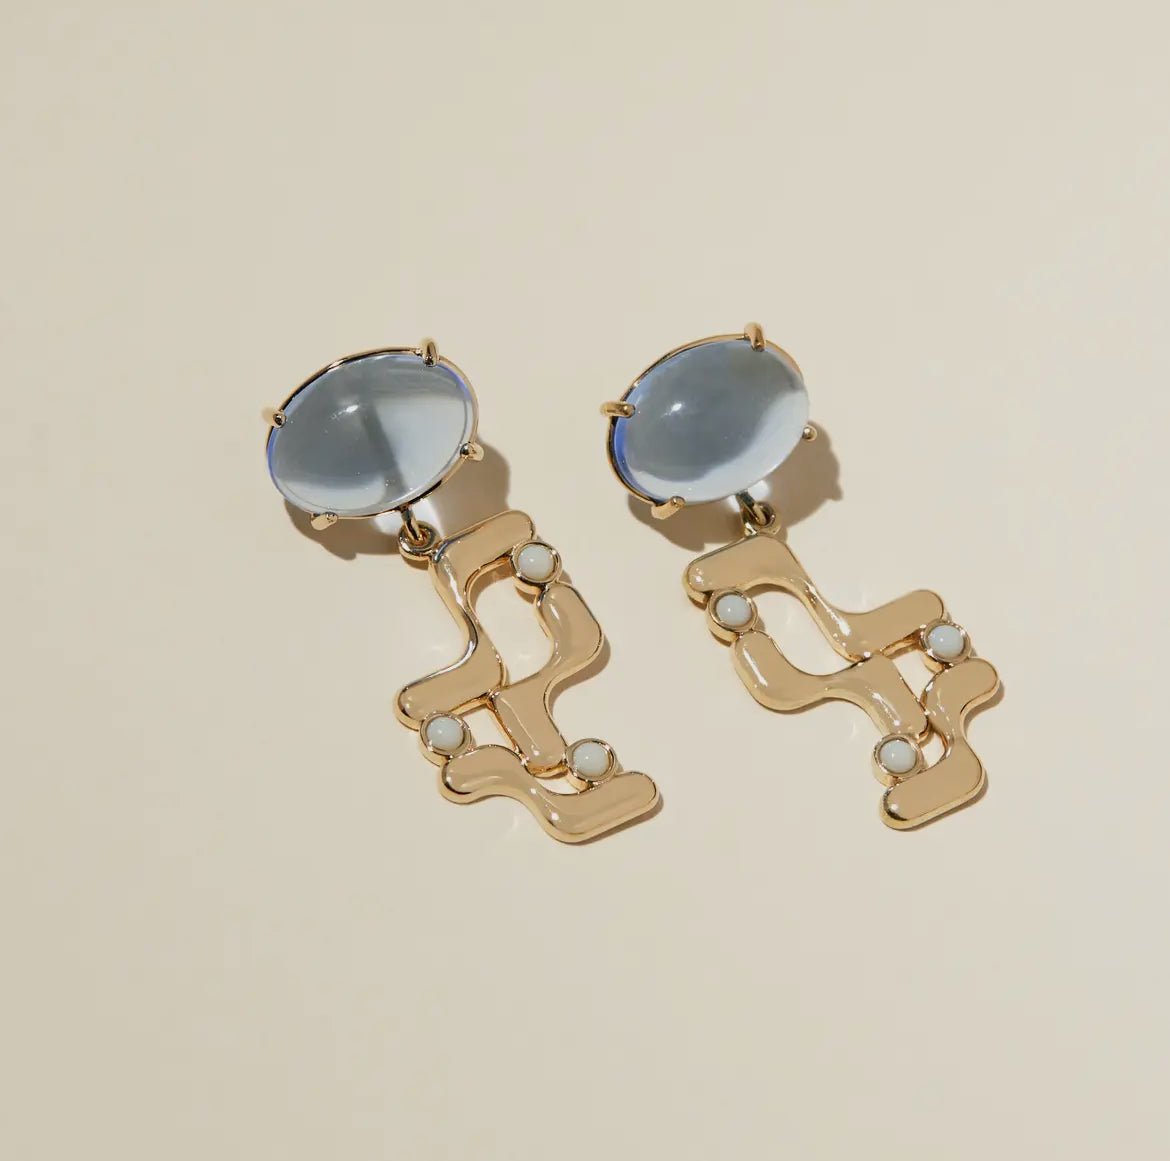 The Halsted Earrings - Blue